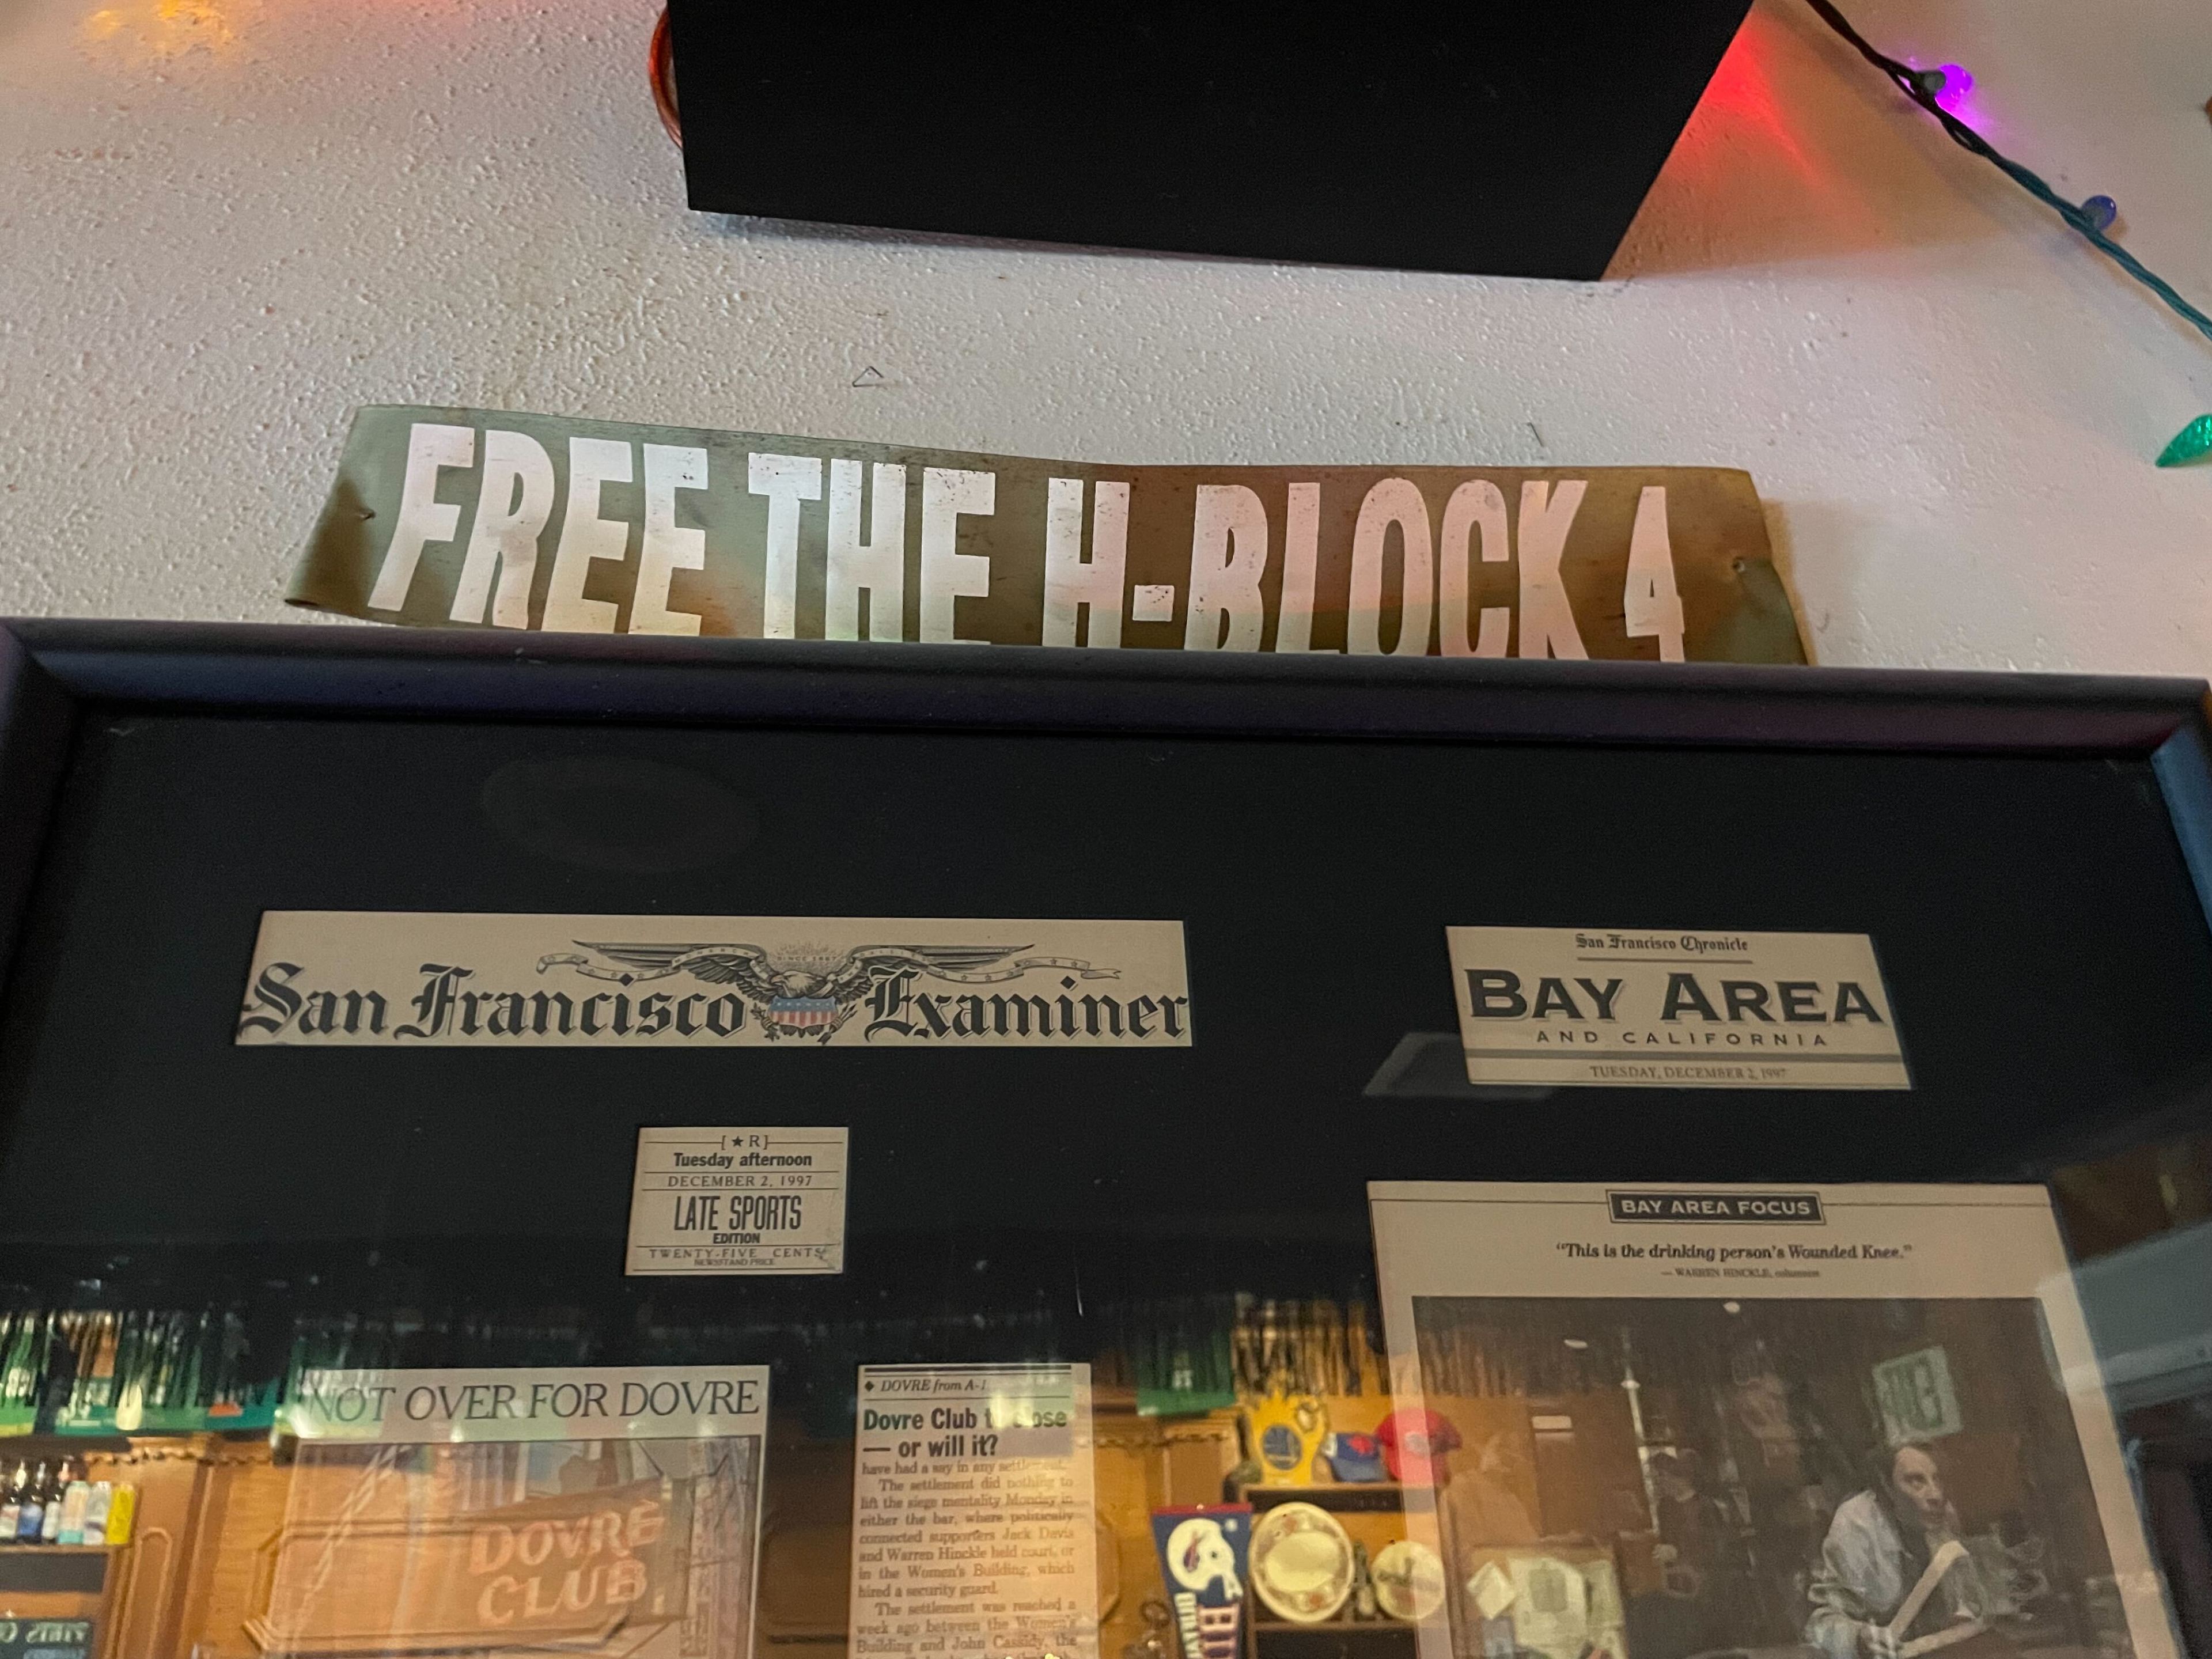 A sign saying &quot;FREE THE H-BLOCK 4,&quot; with framed newspaper titles below, and Christmas lights above.